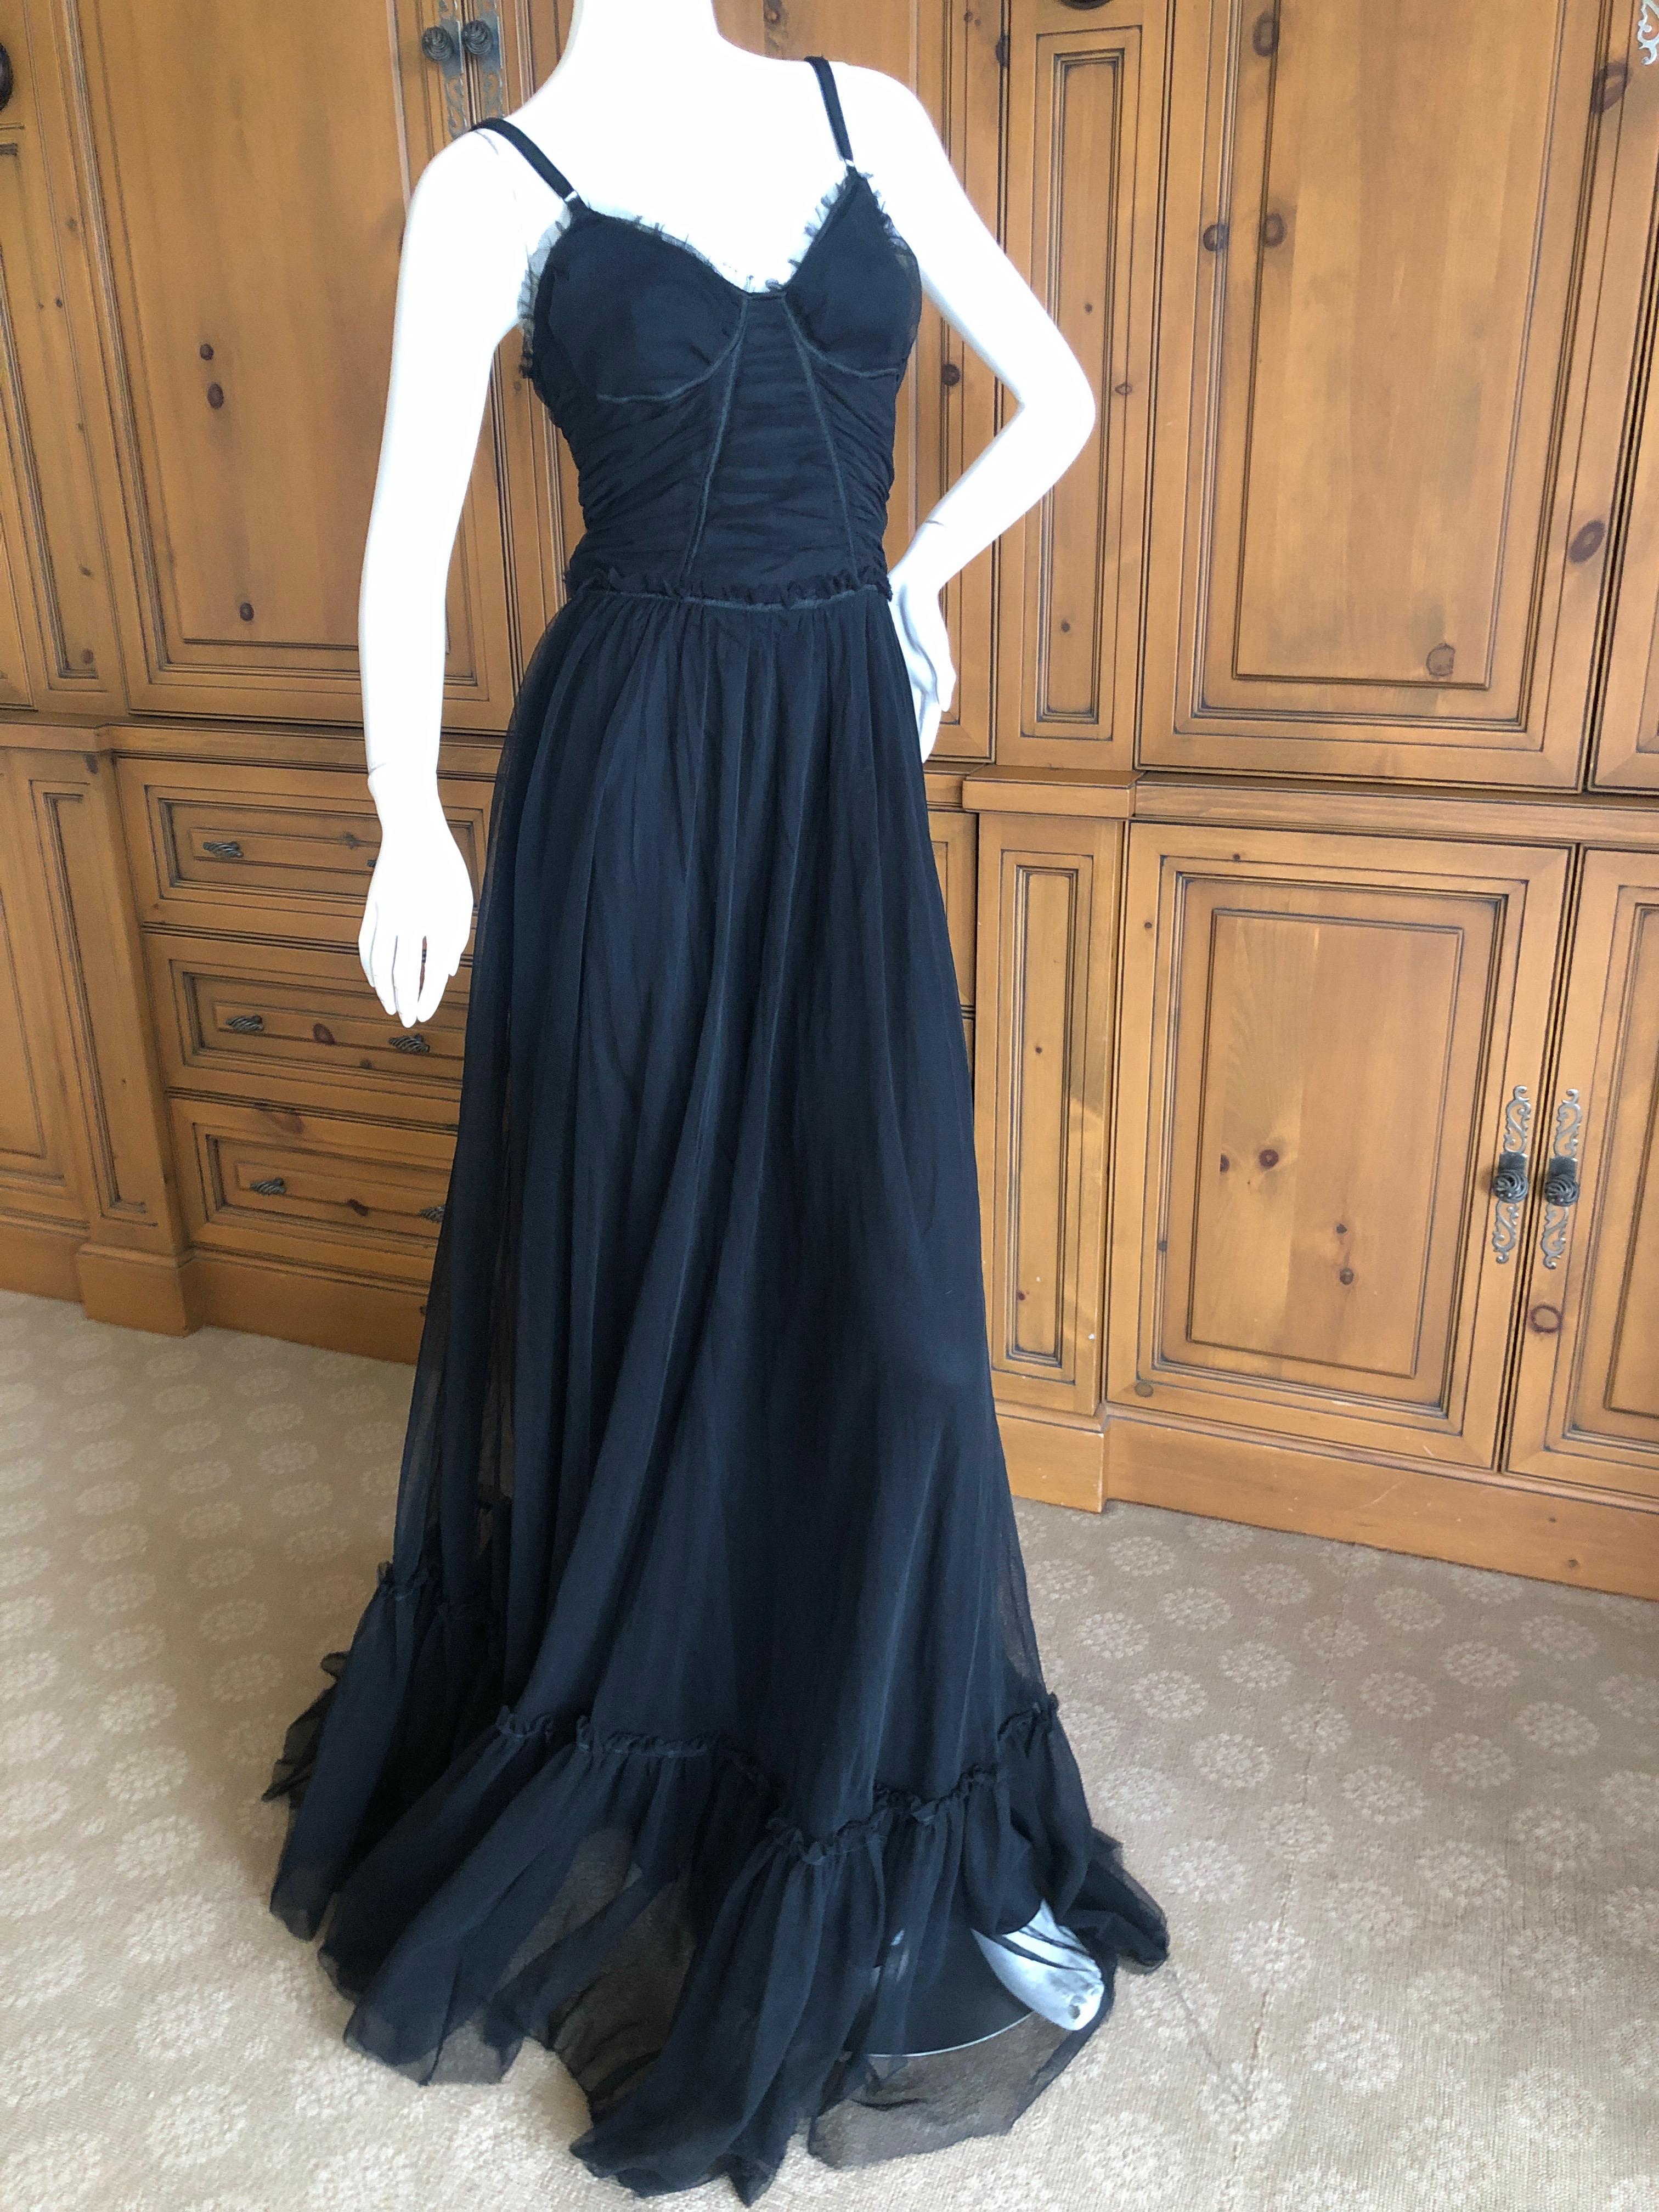 Dolce & Gabbana D&G Vintage Goth Black Morticia Gown with Flowing Long Skirt 44  In Excellent Condition For Sale In Cloverdale, CA